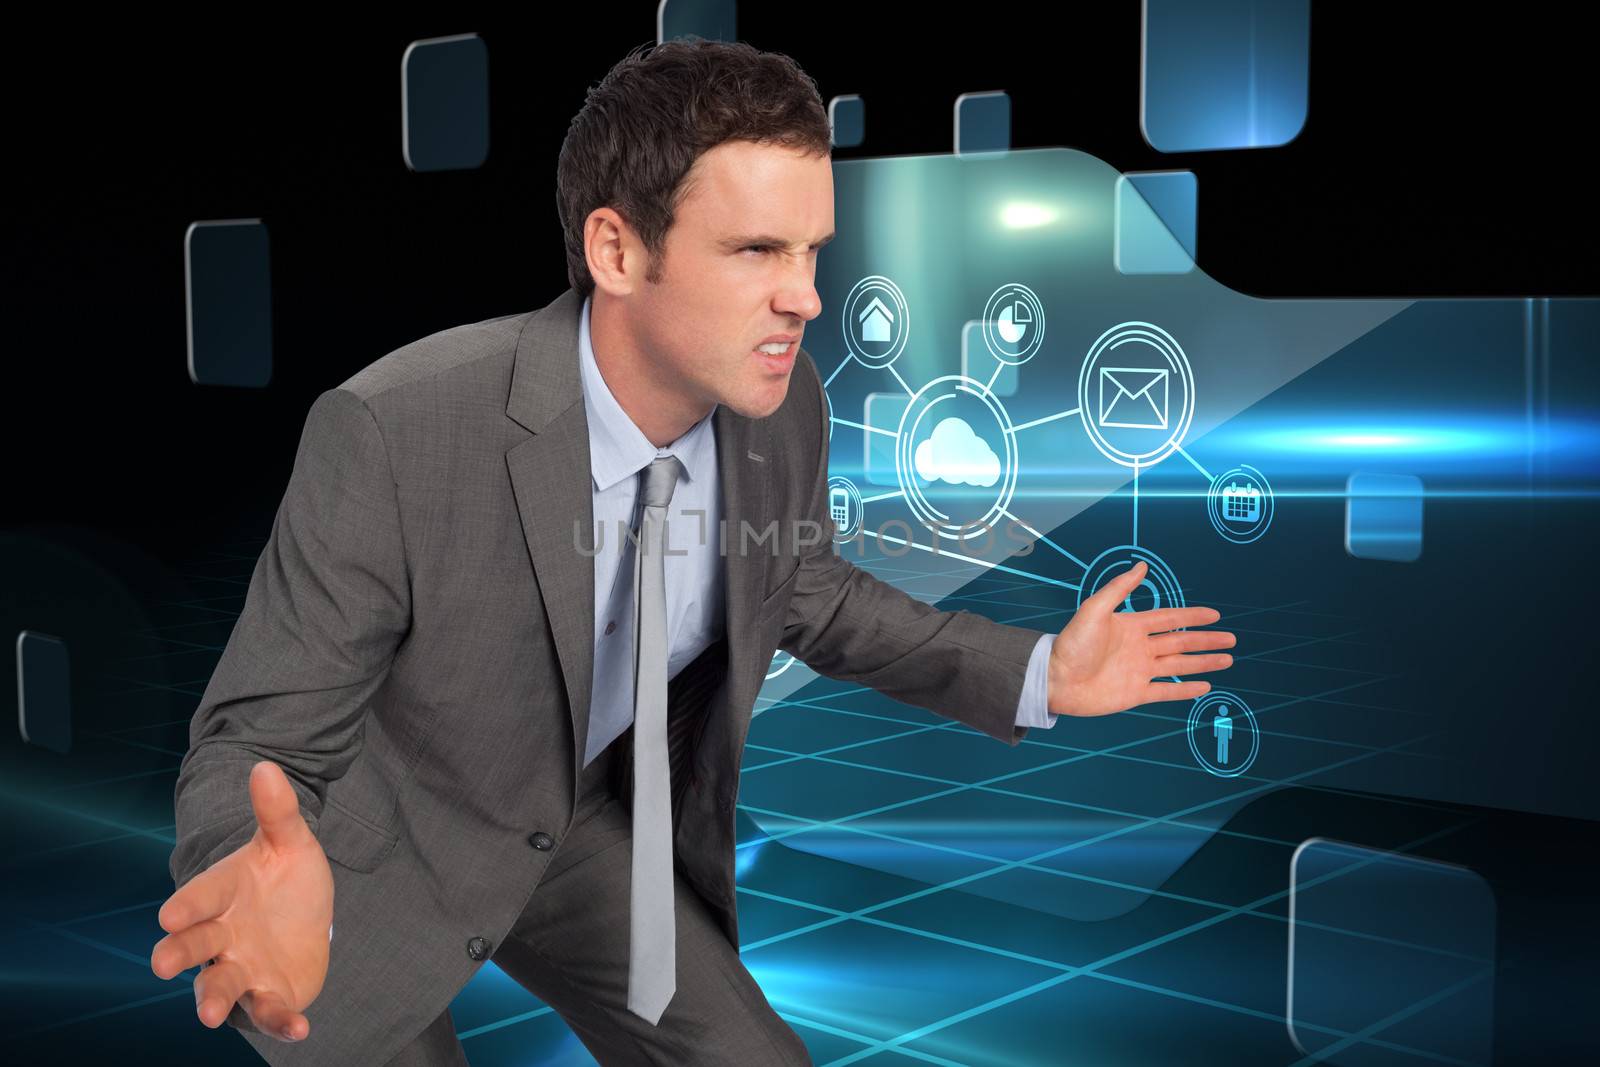 Composite image of businessman posing with hands out by Wavebreakmedia